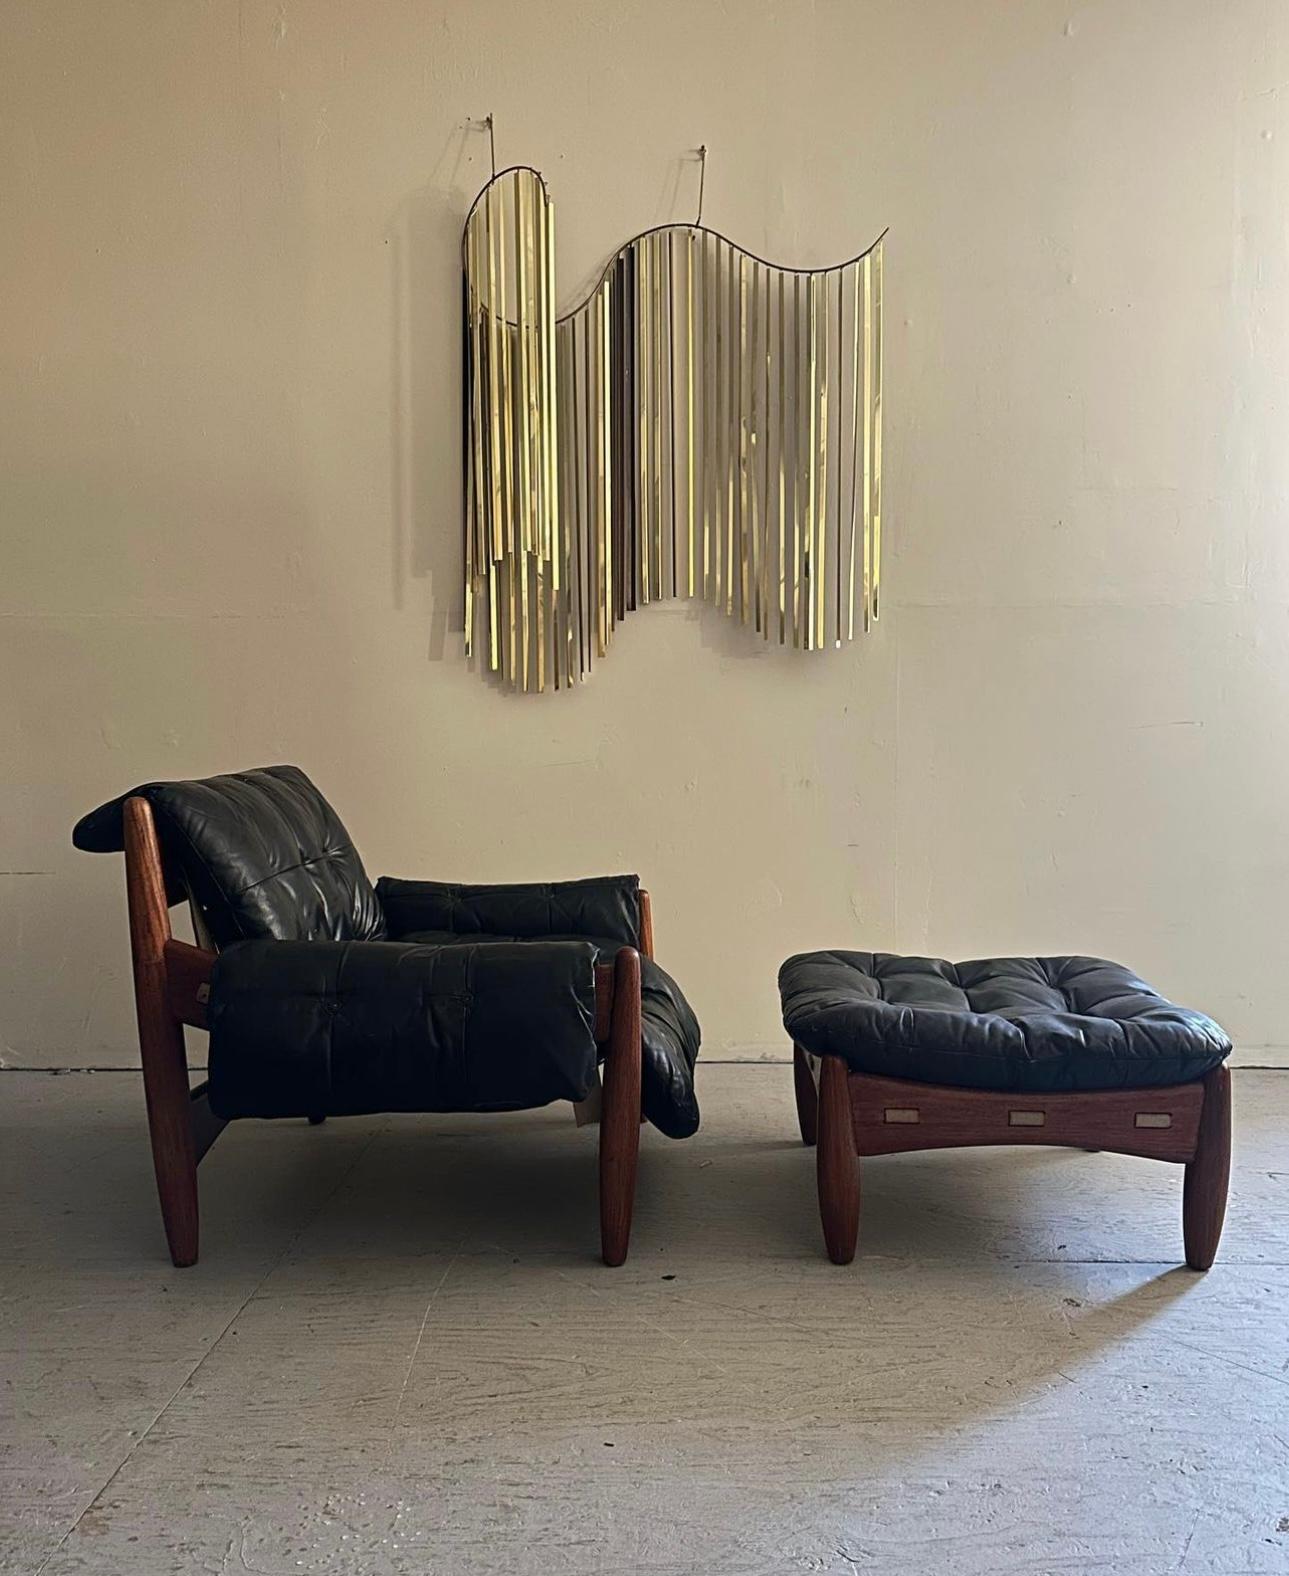 Mid Century Brazilian Modern “Sheriff” Lounge Chair Designed By Sergio Rodrigues. Originally designed in 1957, this chair took first prize at the IV Concorde Internazionale del Mobile competition in 1961. This iconic chair features a solid Brazilian